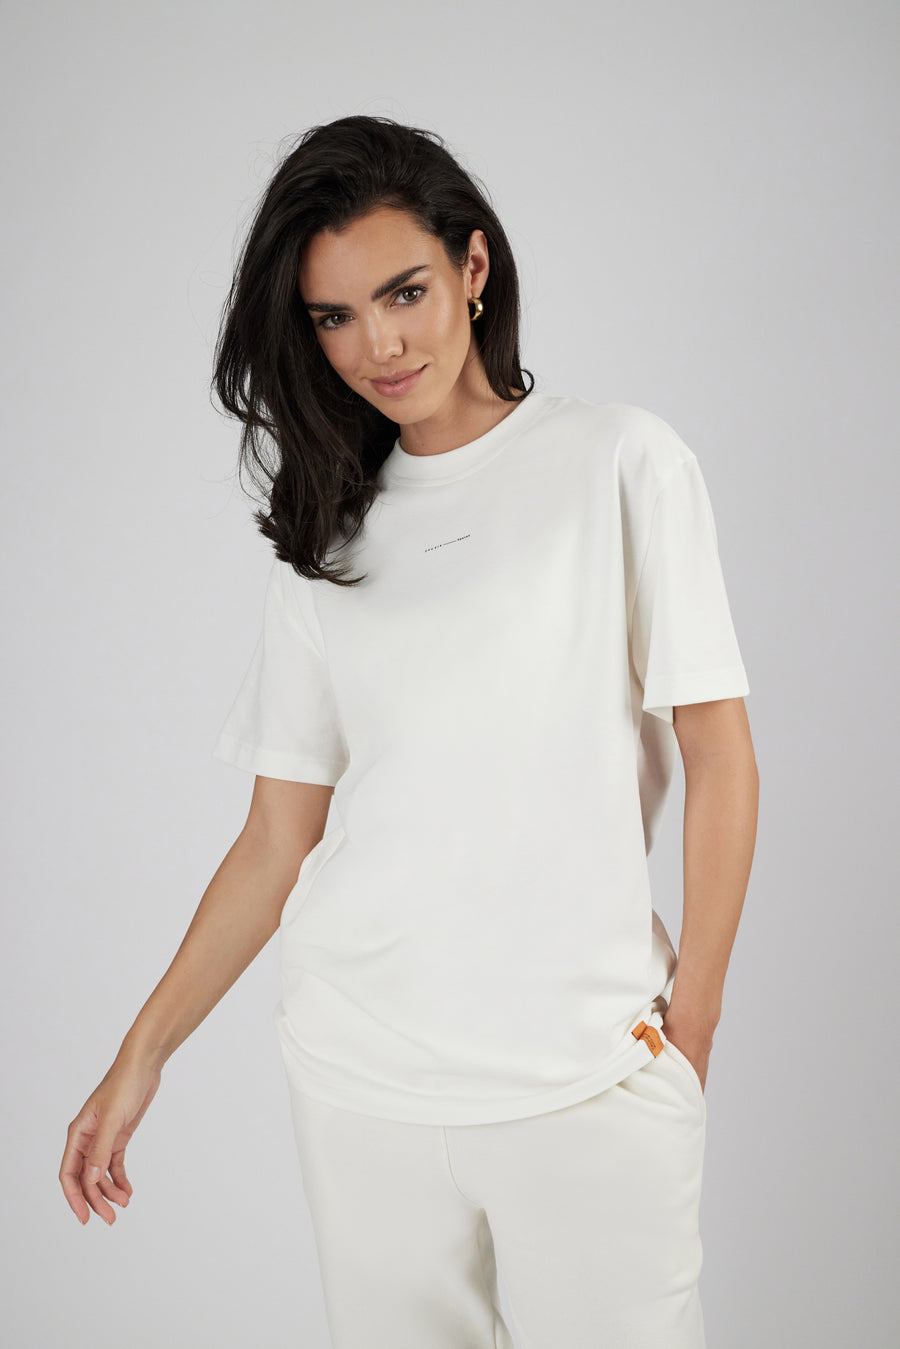 Woman wearing an oversized unisex T-Shirt in color white